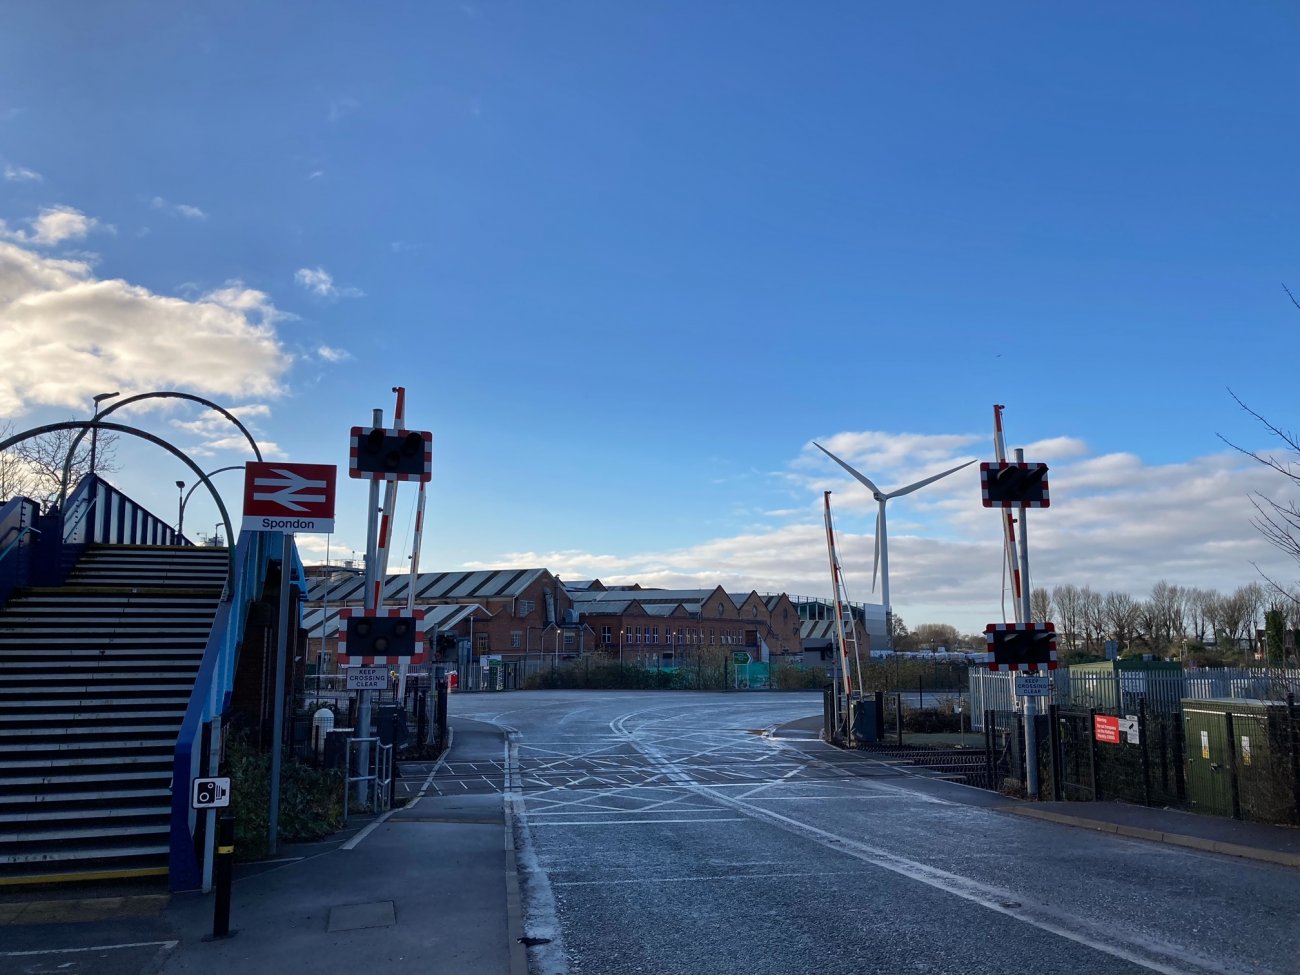 Photograph of Station Road level crossing and Celanese